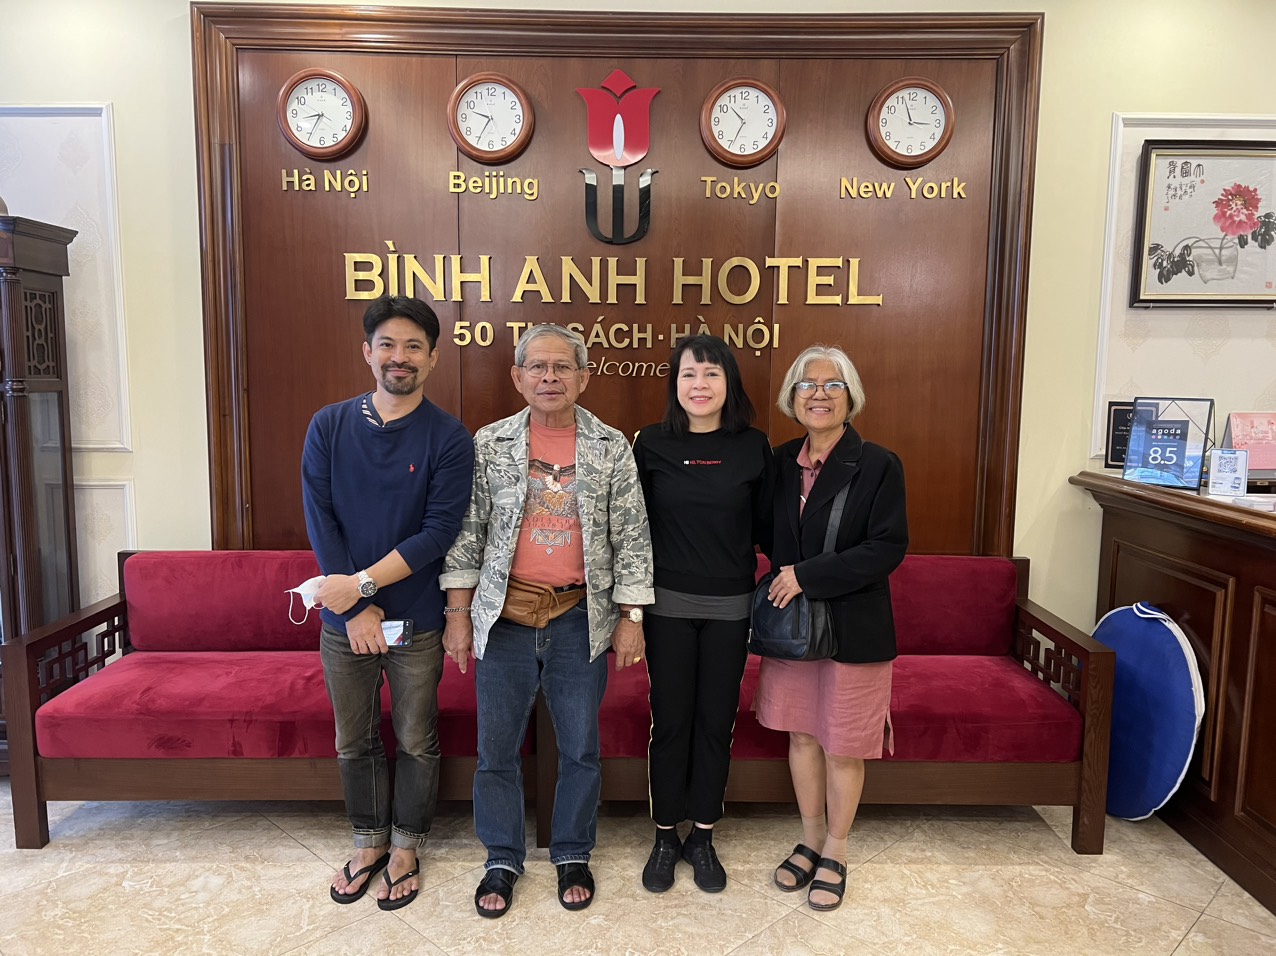 <p>We come from Thailand. We booked rooms at Binh Anh Hotel on Agoda channel. It's so glad to be here because of good service and clean rooms.</p>

<p> </p>
